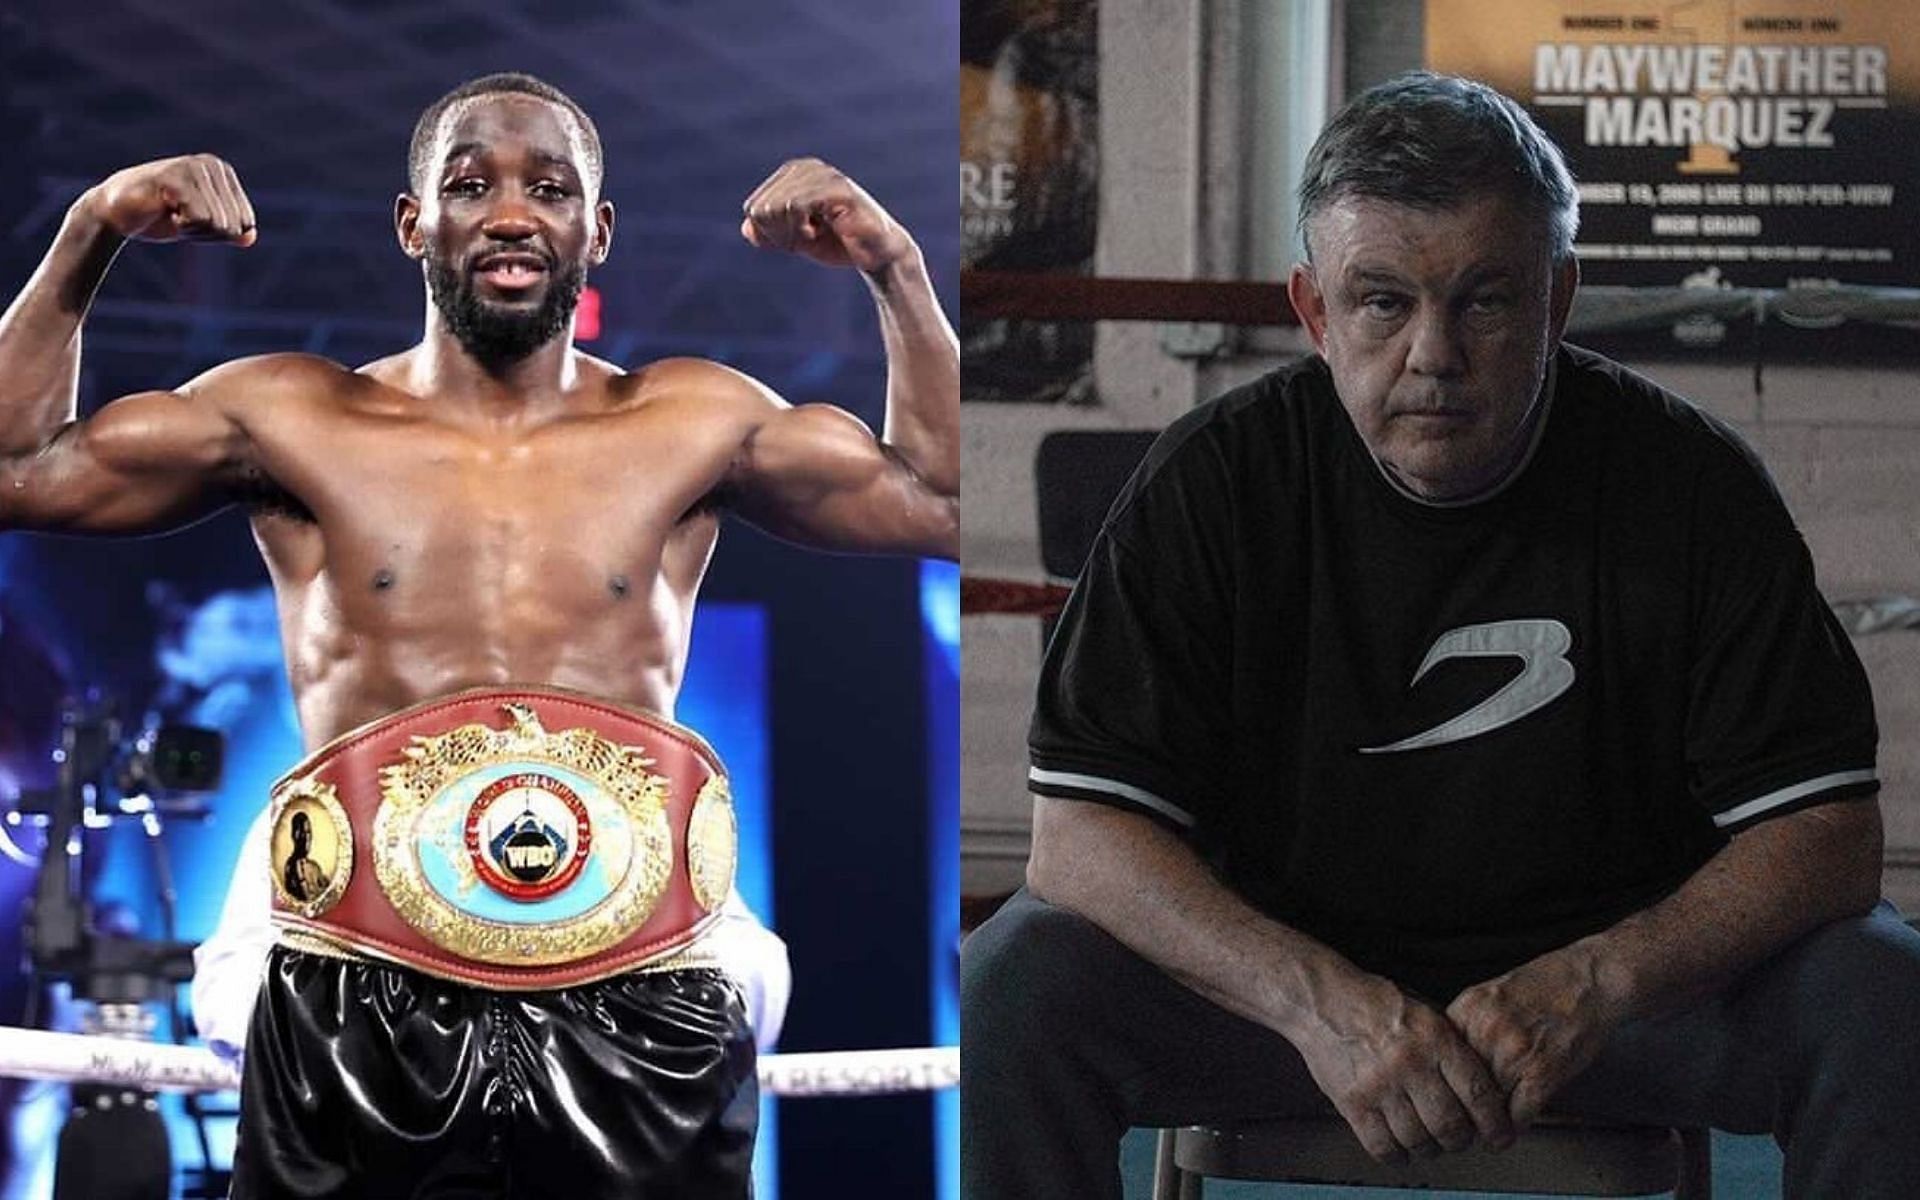 Terence Crawford (left) and Teddy Atlas (right) [Image Courtesy: @tbudcrawford and @teddy_atlas on Instagram]